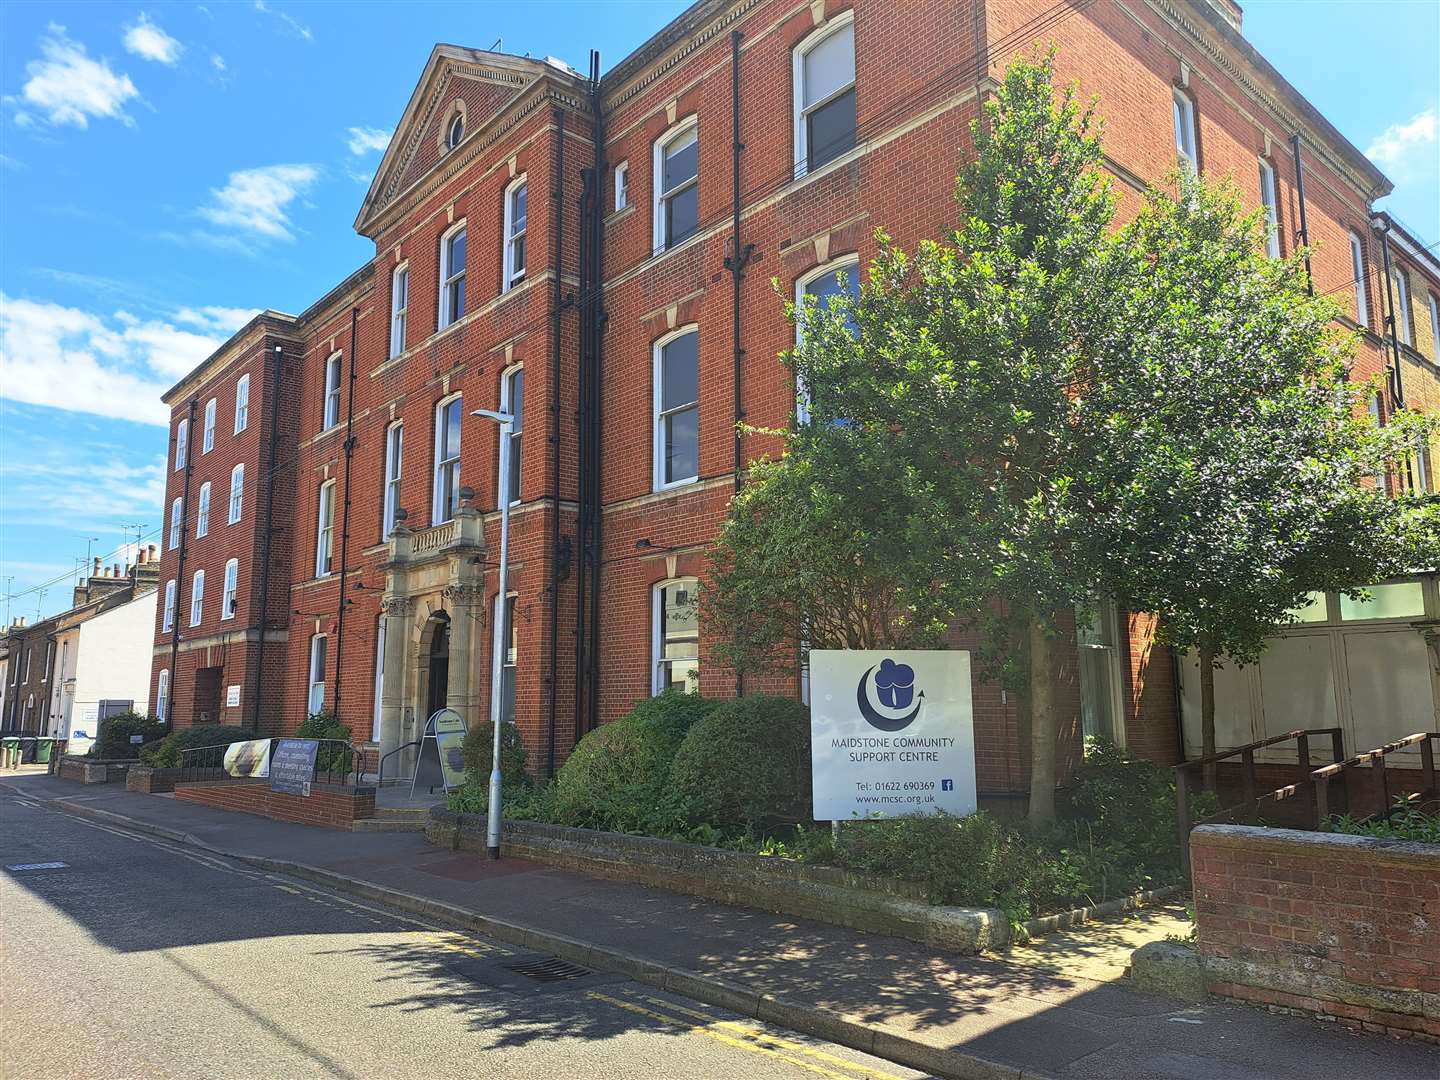 The Maidstone Community Support Centre in Marsham Street